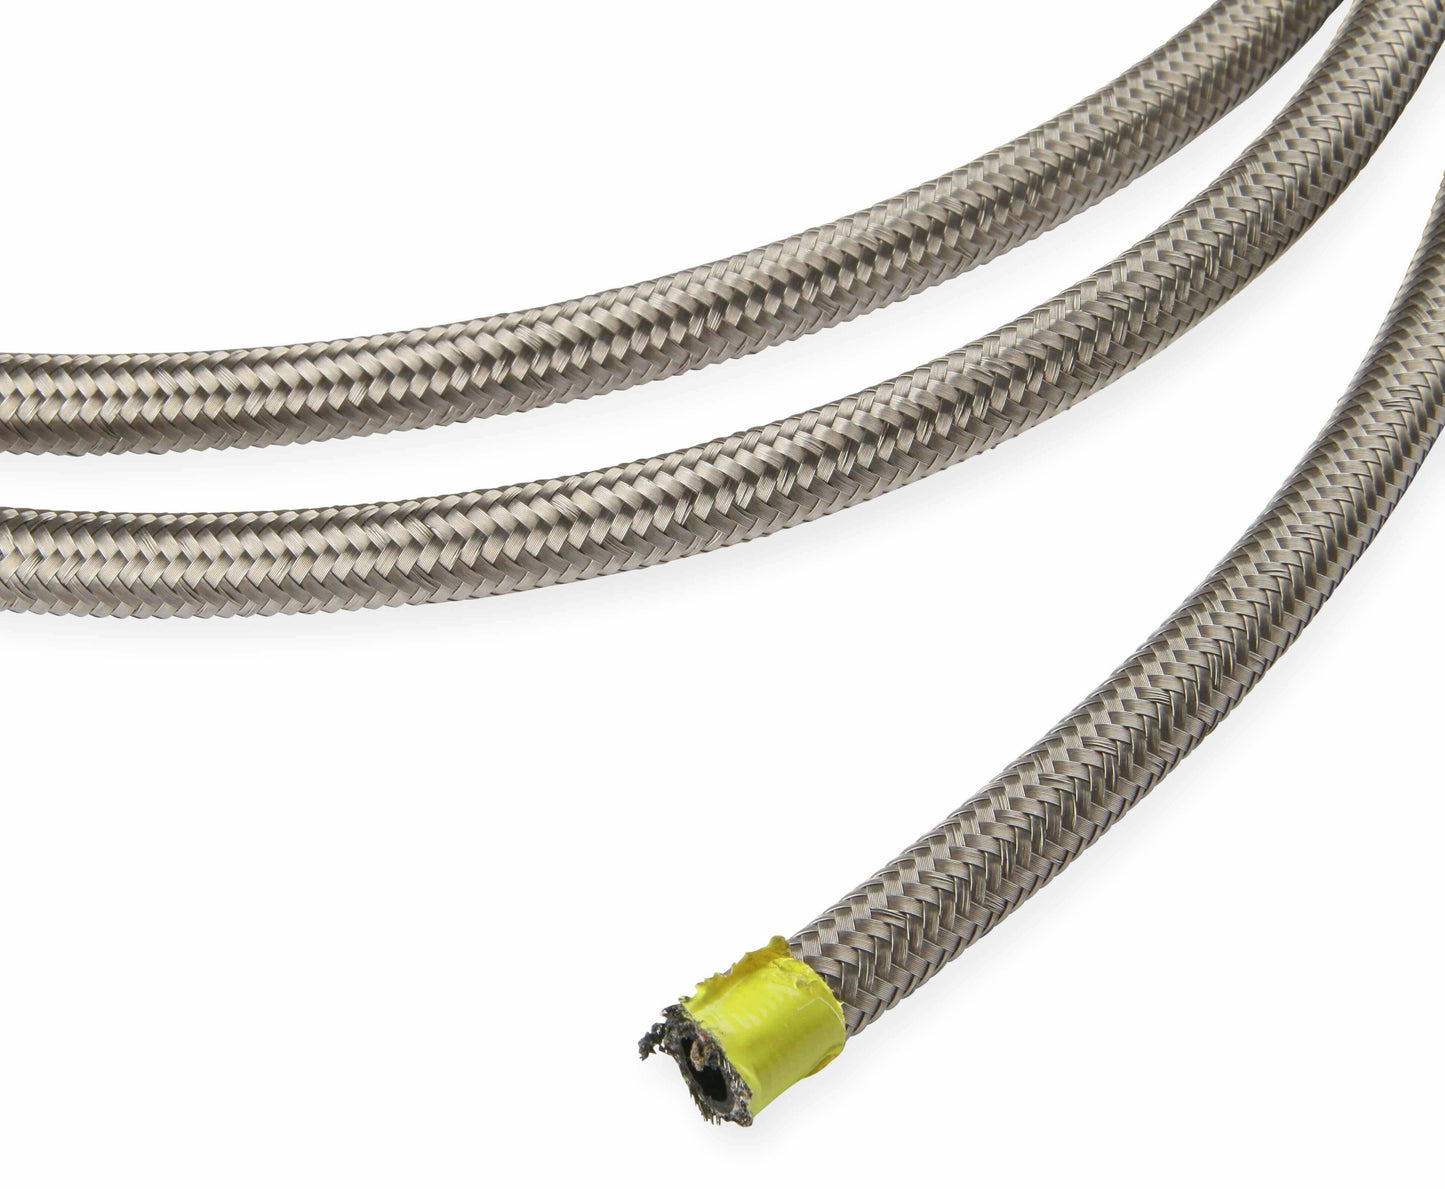 Earls Auto-Flex Hose- Size10 -Sold Per Foot Continuous Length upto 25'-300010ERL